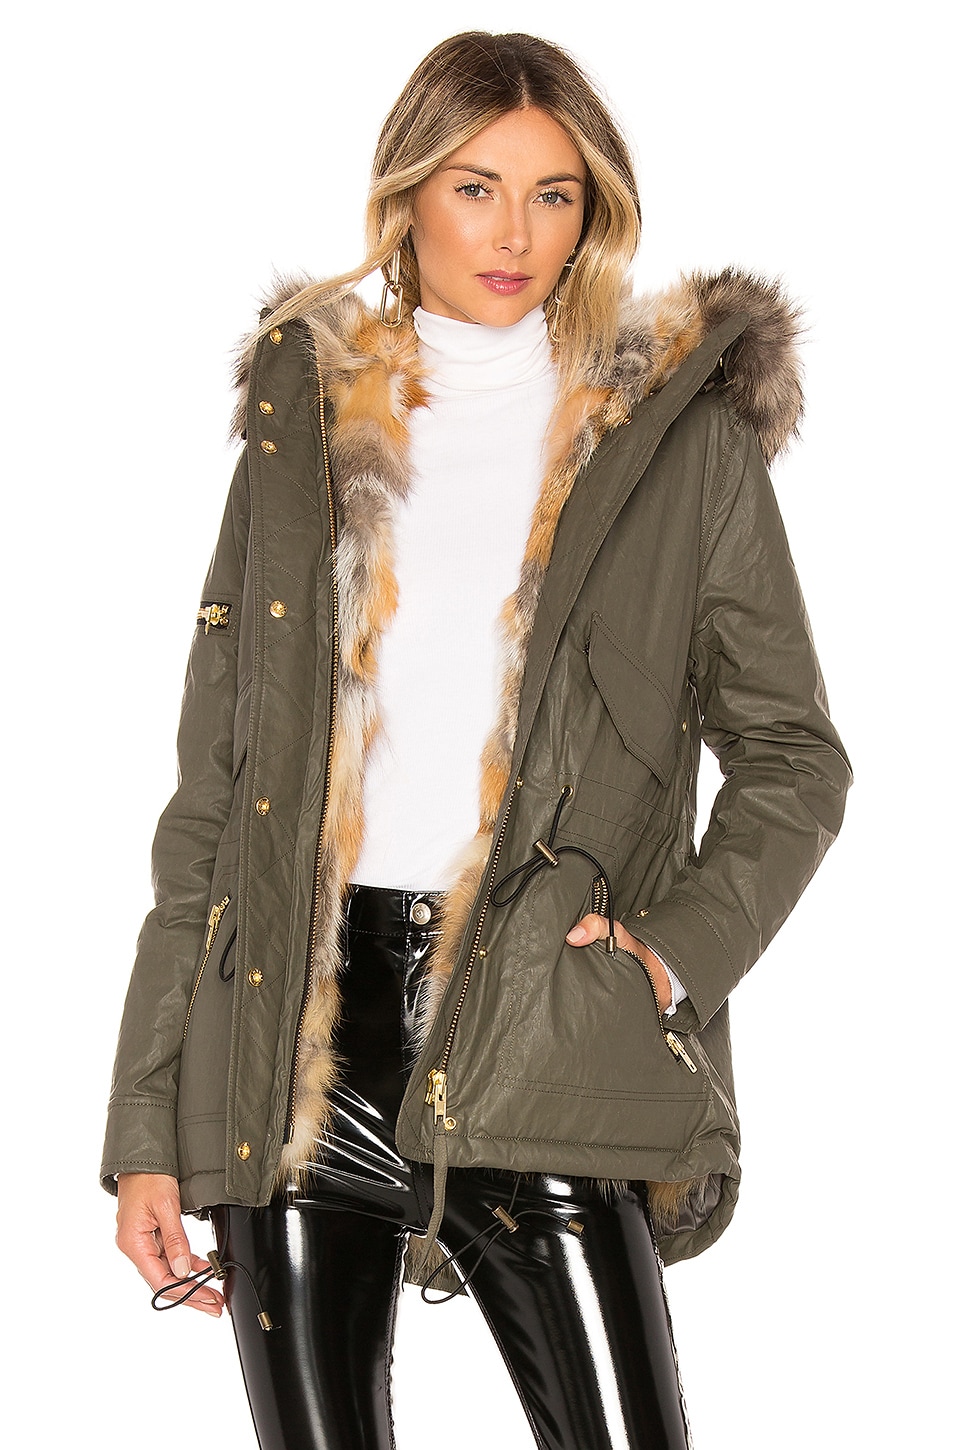 SAM. Mini Luxe Limelight Parka With Fur Lining in Army & Melange | REVOLVE